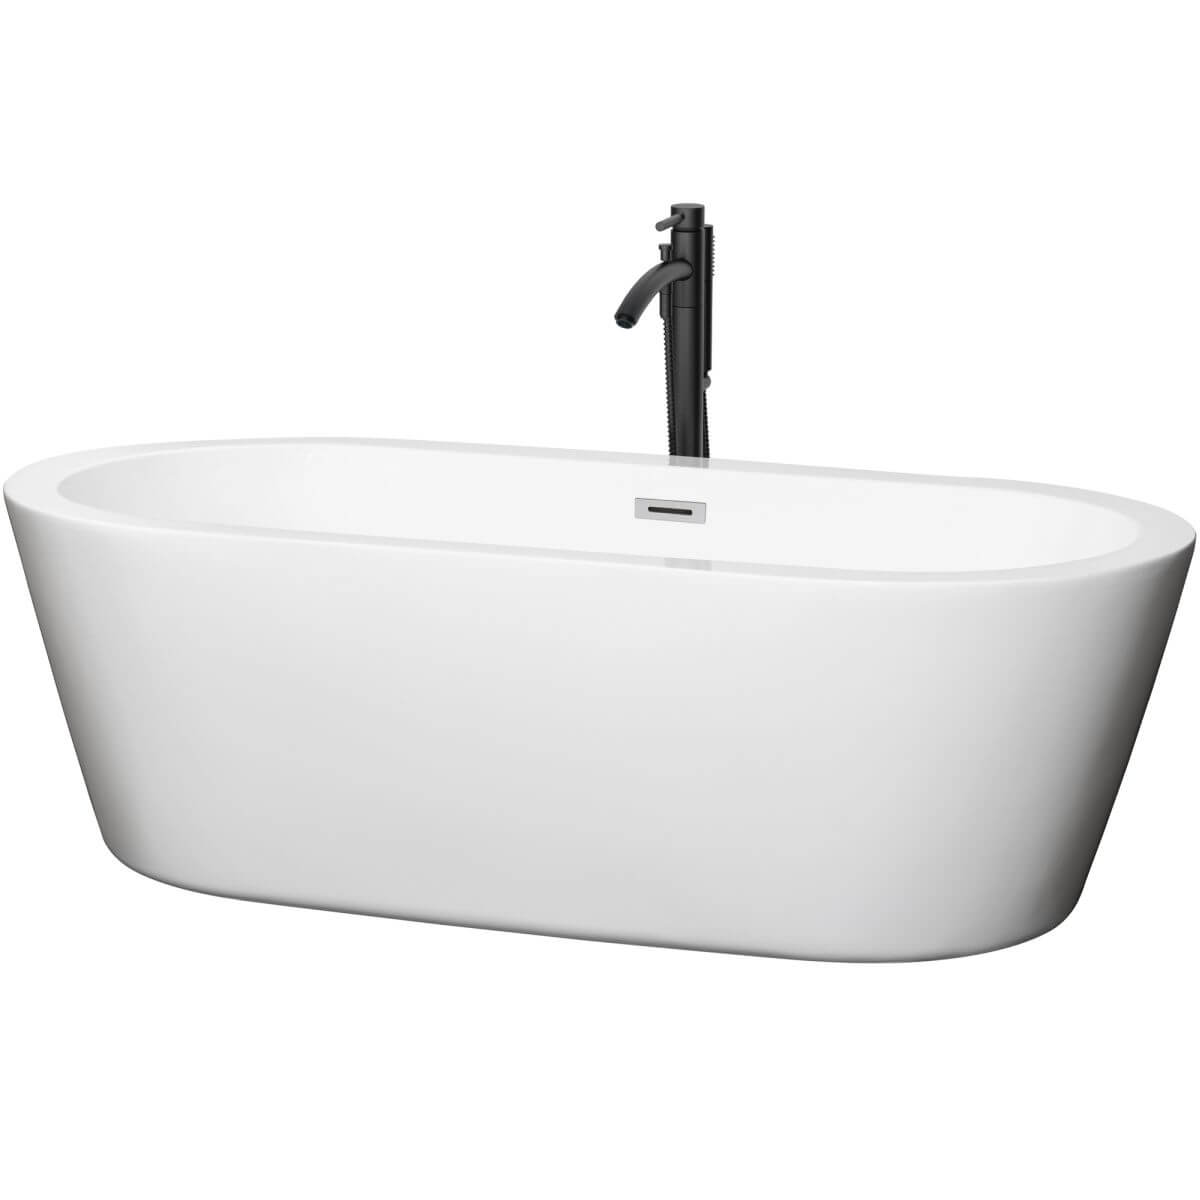 Wyndham Collection Mermaid 71 inch Freestanding Bathtub in White with Polished Chrome Trim and Floor Mounted Faucet in Matte Black - WCOBT100371PCATPBK